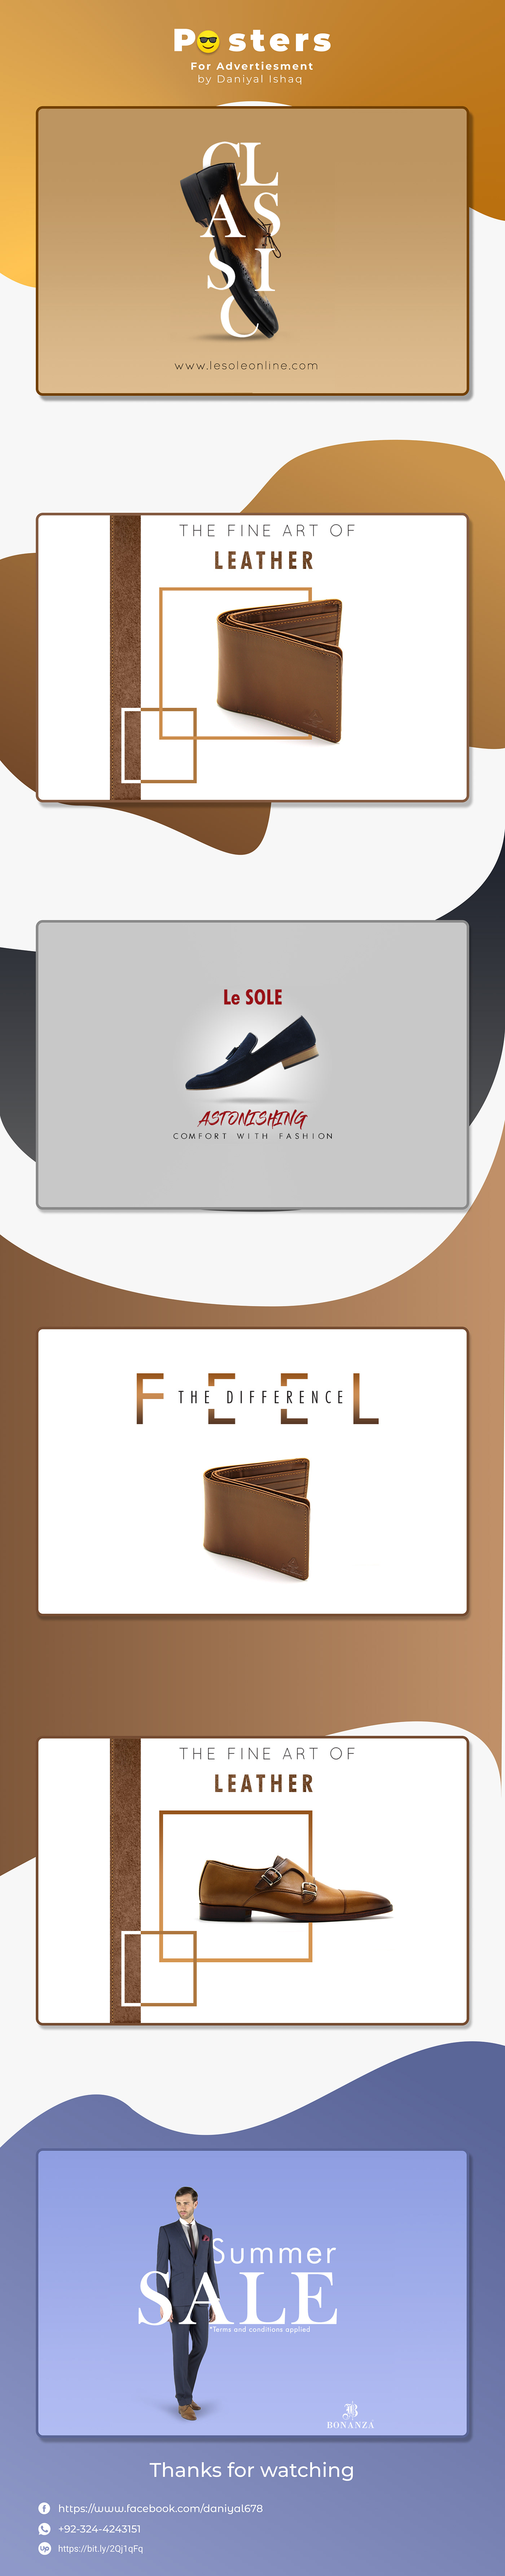 Shoes Poster posters banners advertisement social media adds posts branding  brands